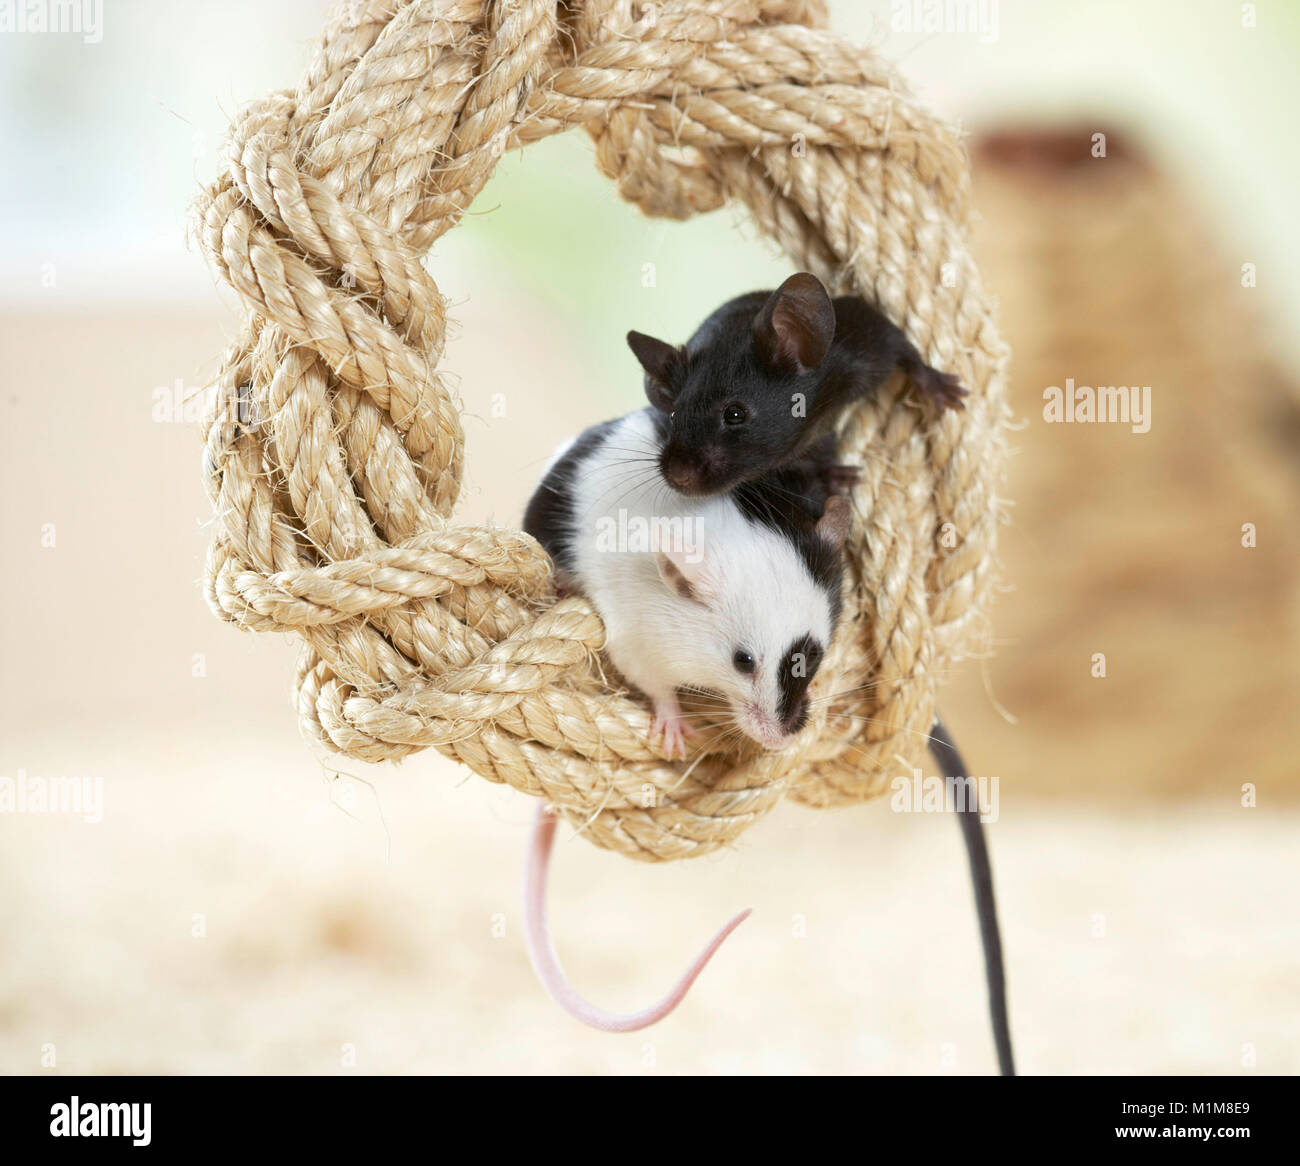 Fancy Mouse in a circle made of a rope. Germany Stock Photo